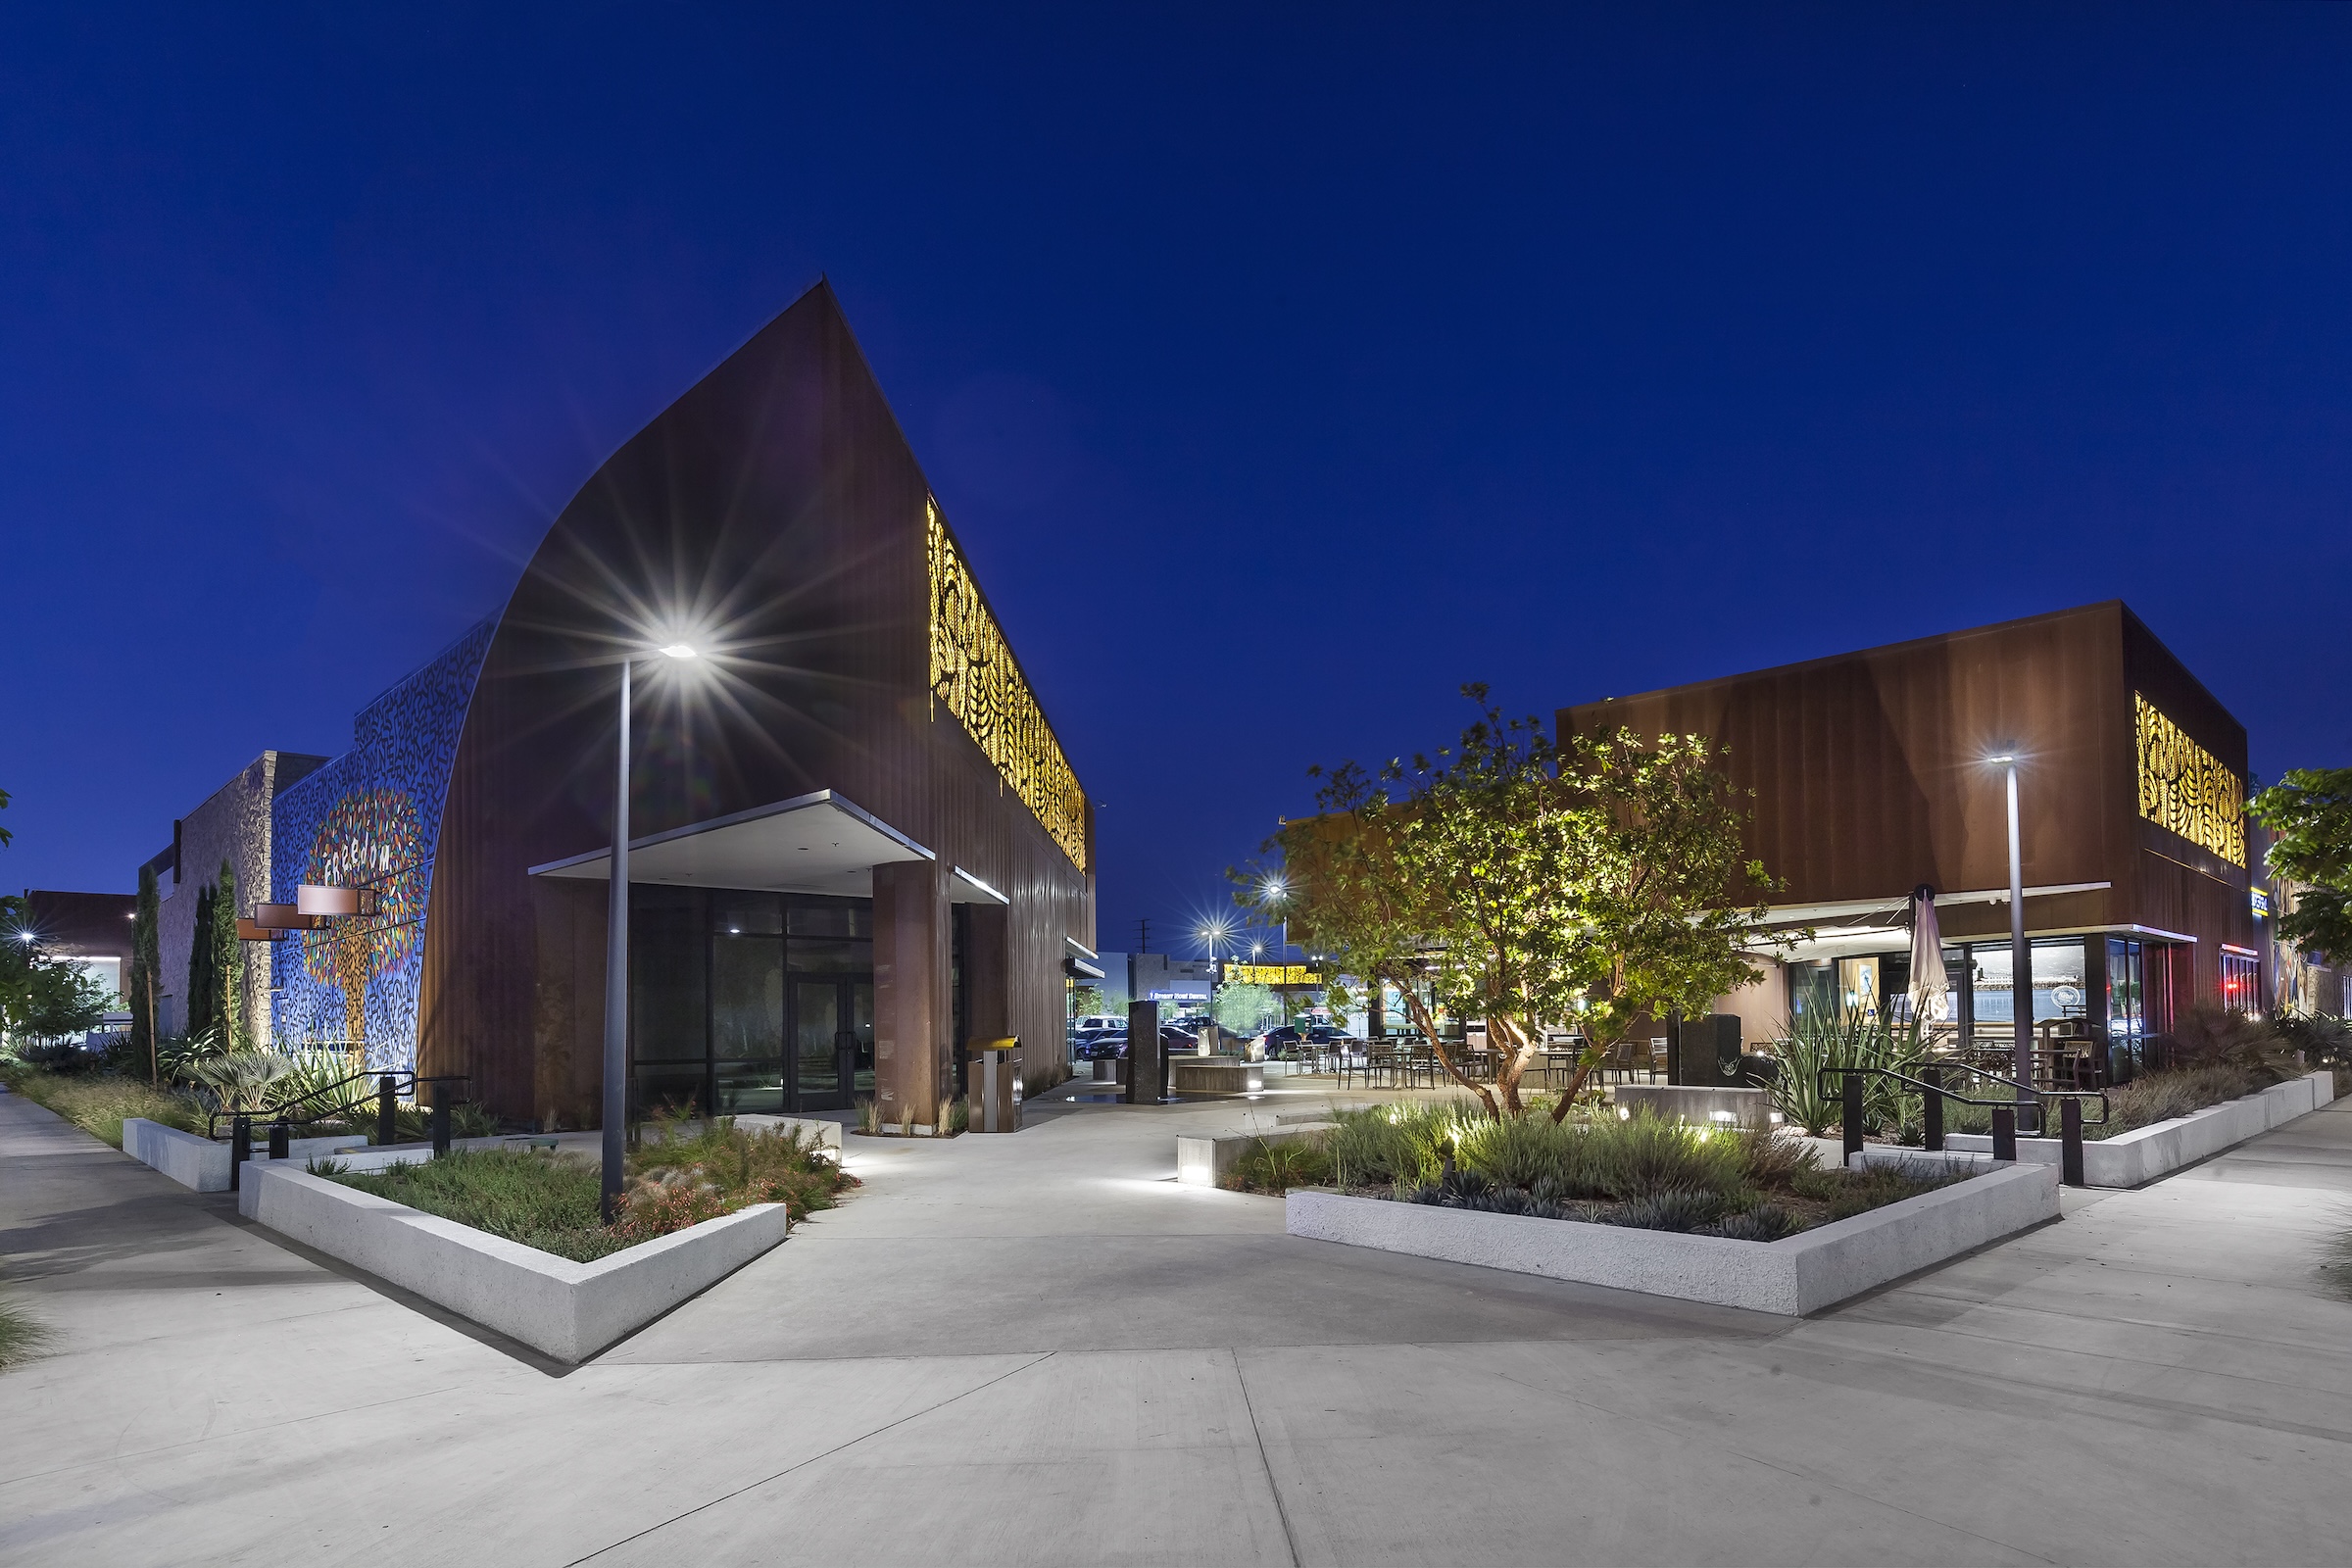 The Freedom Plaza shopping center in Los Angeles was designed to be a reflection of the people of Watts, Calif., and to serve as a community-centric gathering space.